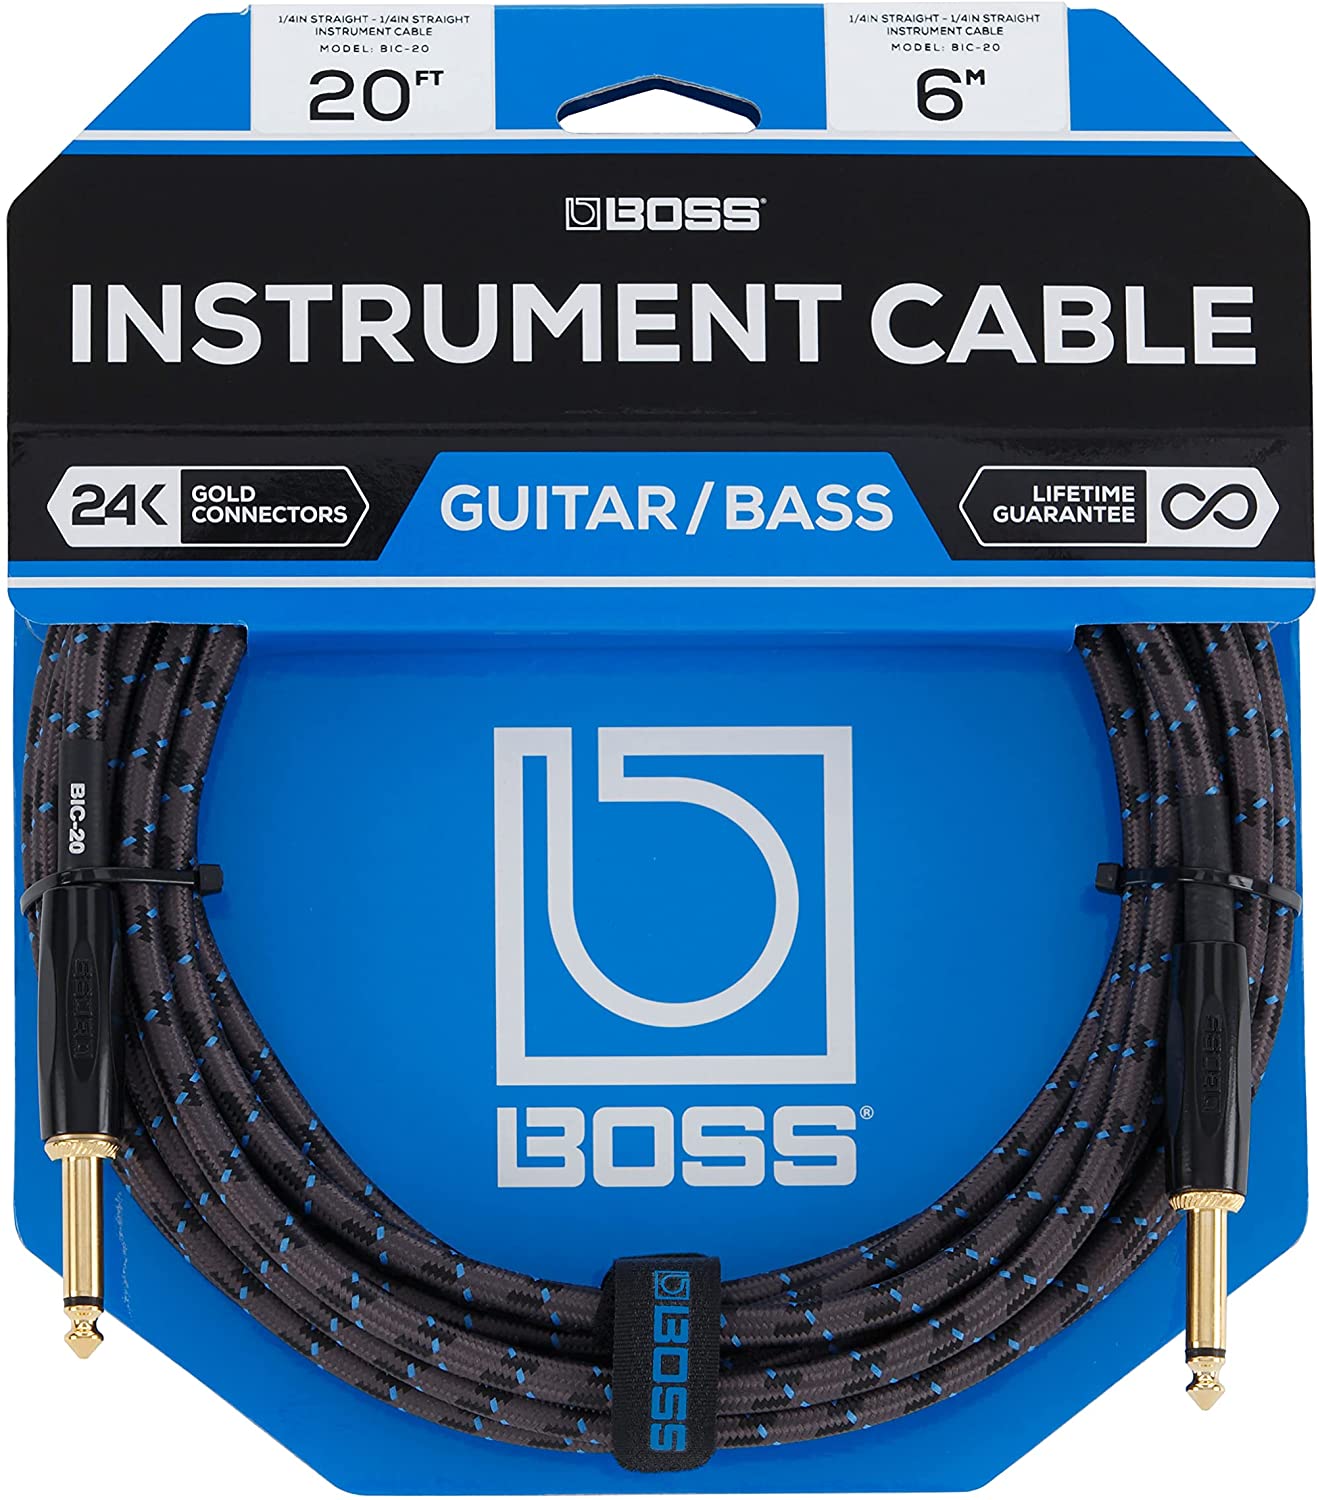 5. BOSS Instrument Cable